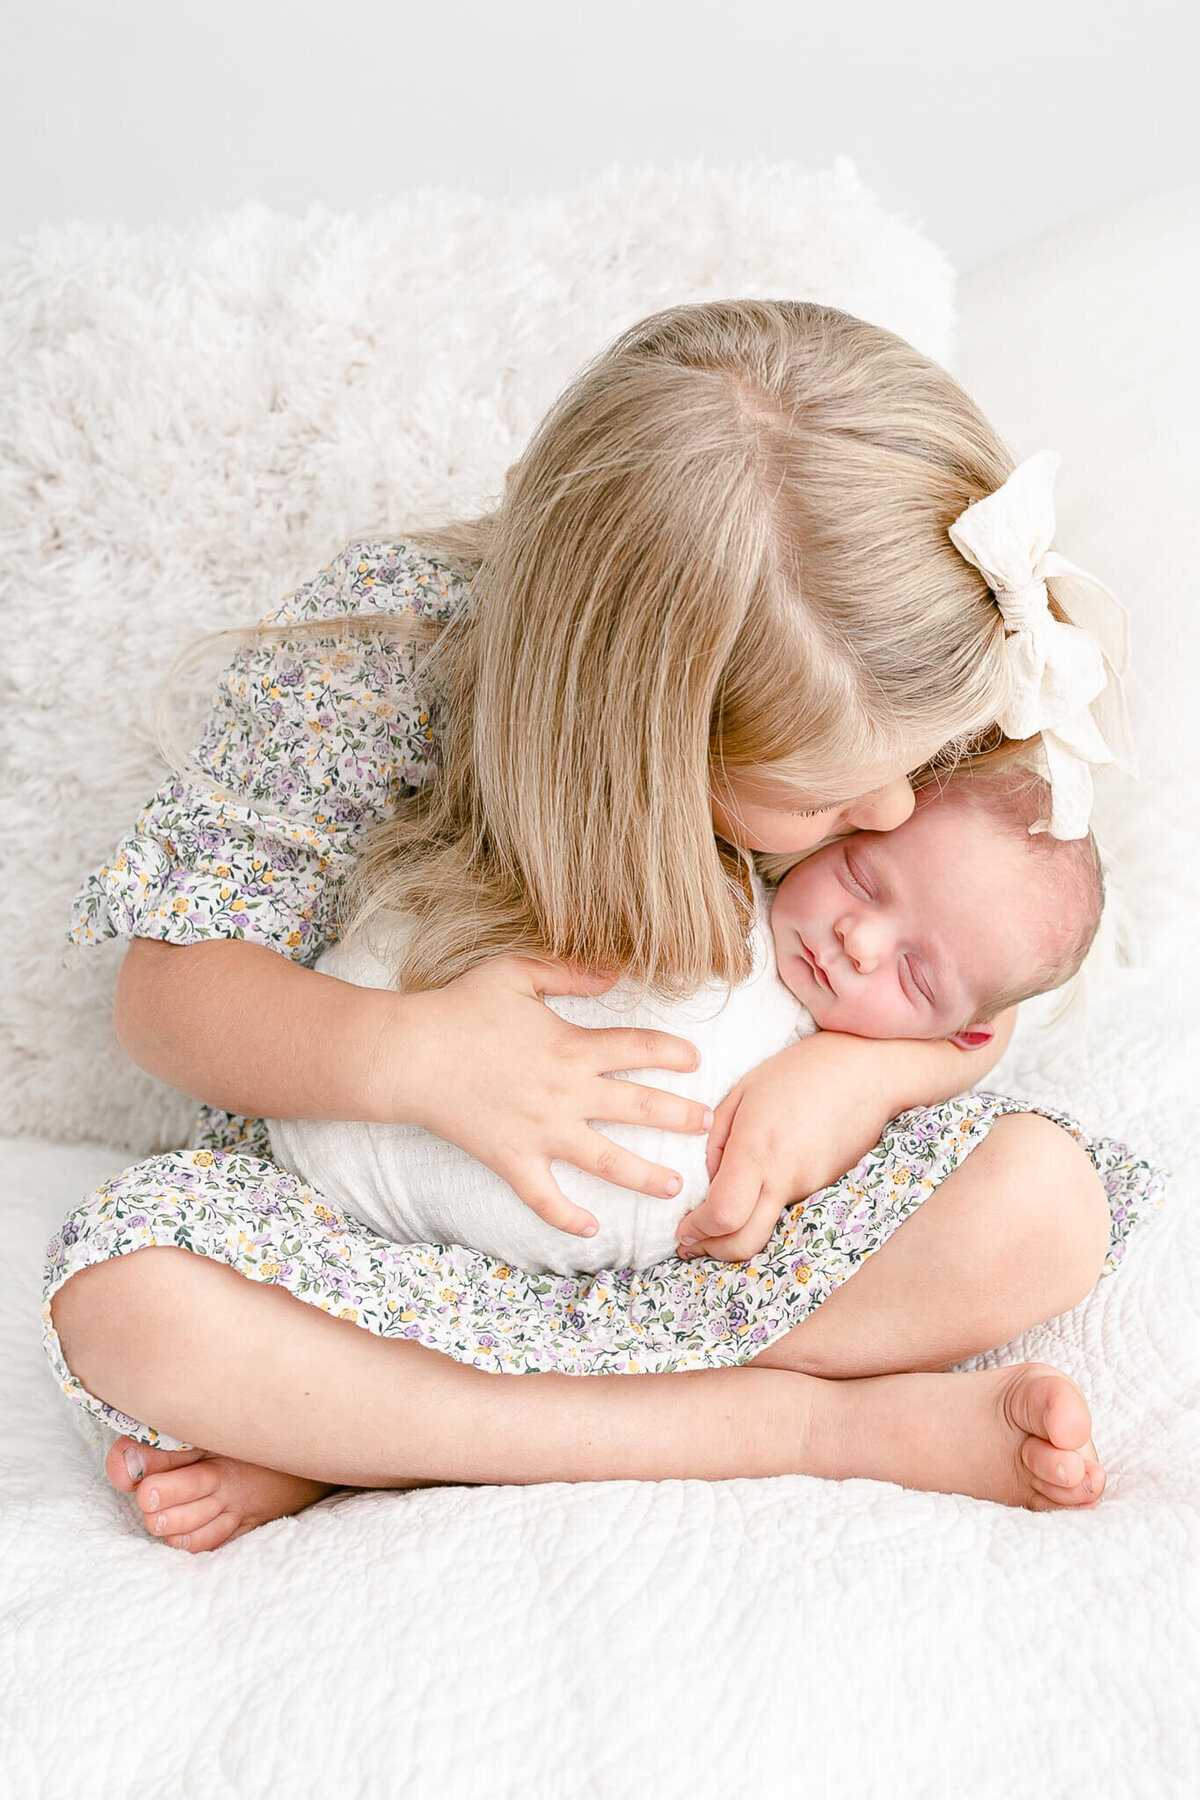 Little toddler girl sitting crossed-legged and holding her baby brother in her arms while sitting on a bed with neutral covers and pillows. She is kissing her baby brother on the temple with her blonde hair cascading down over him. Baby is sleeping.